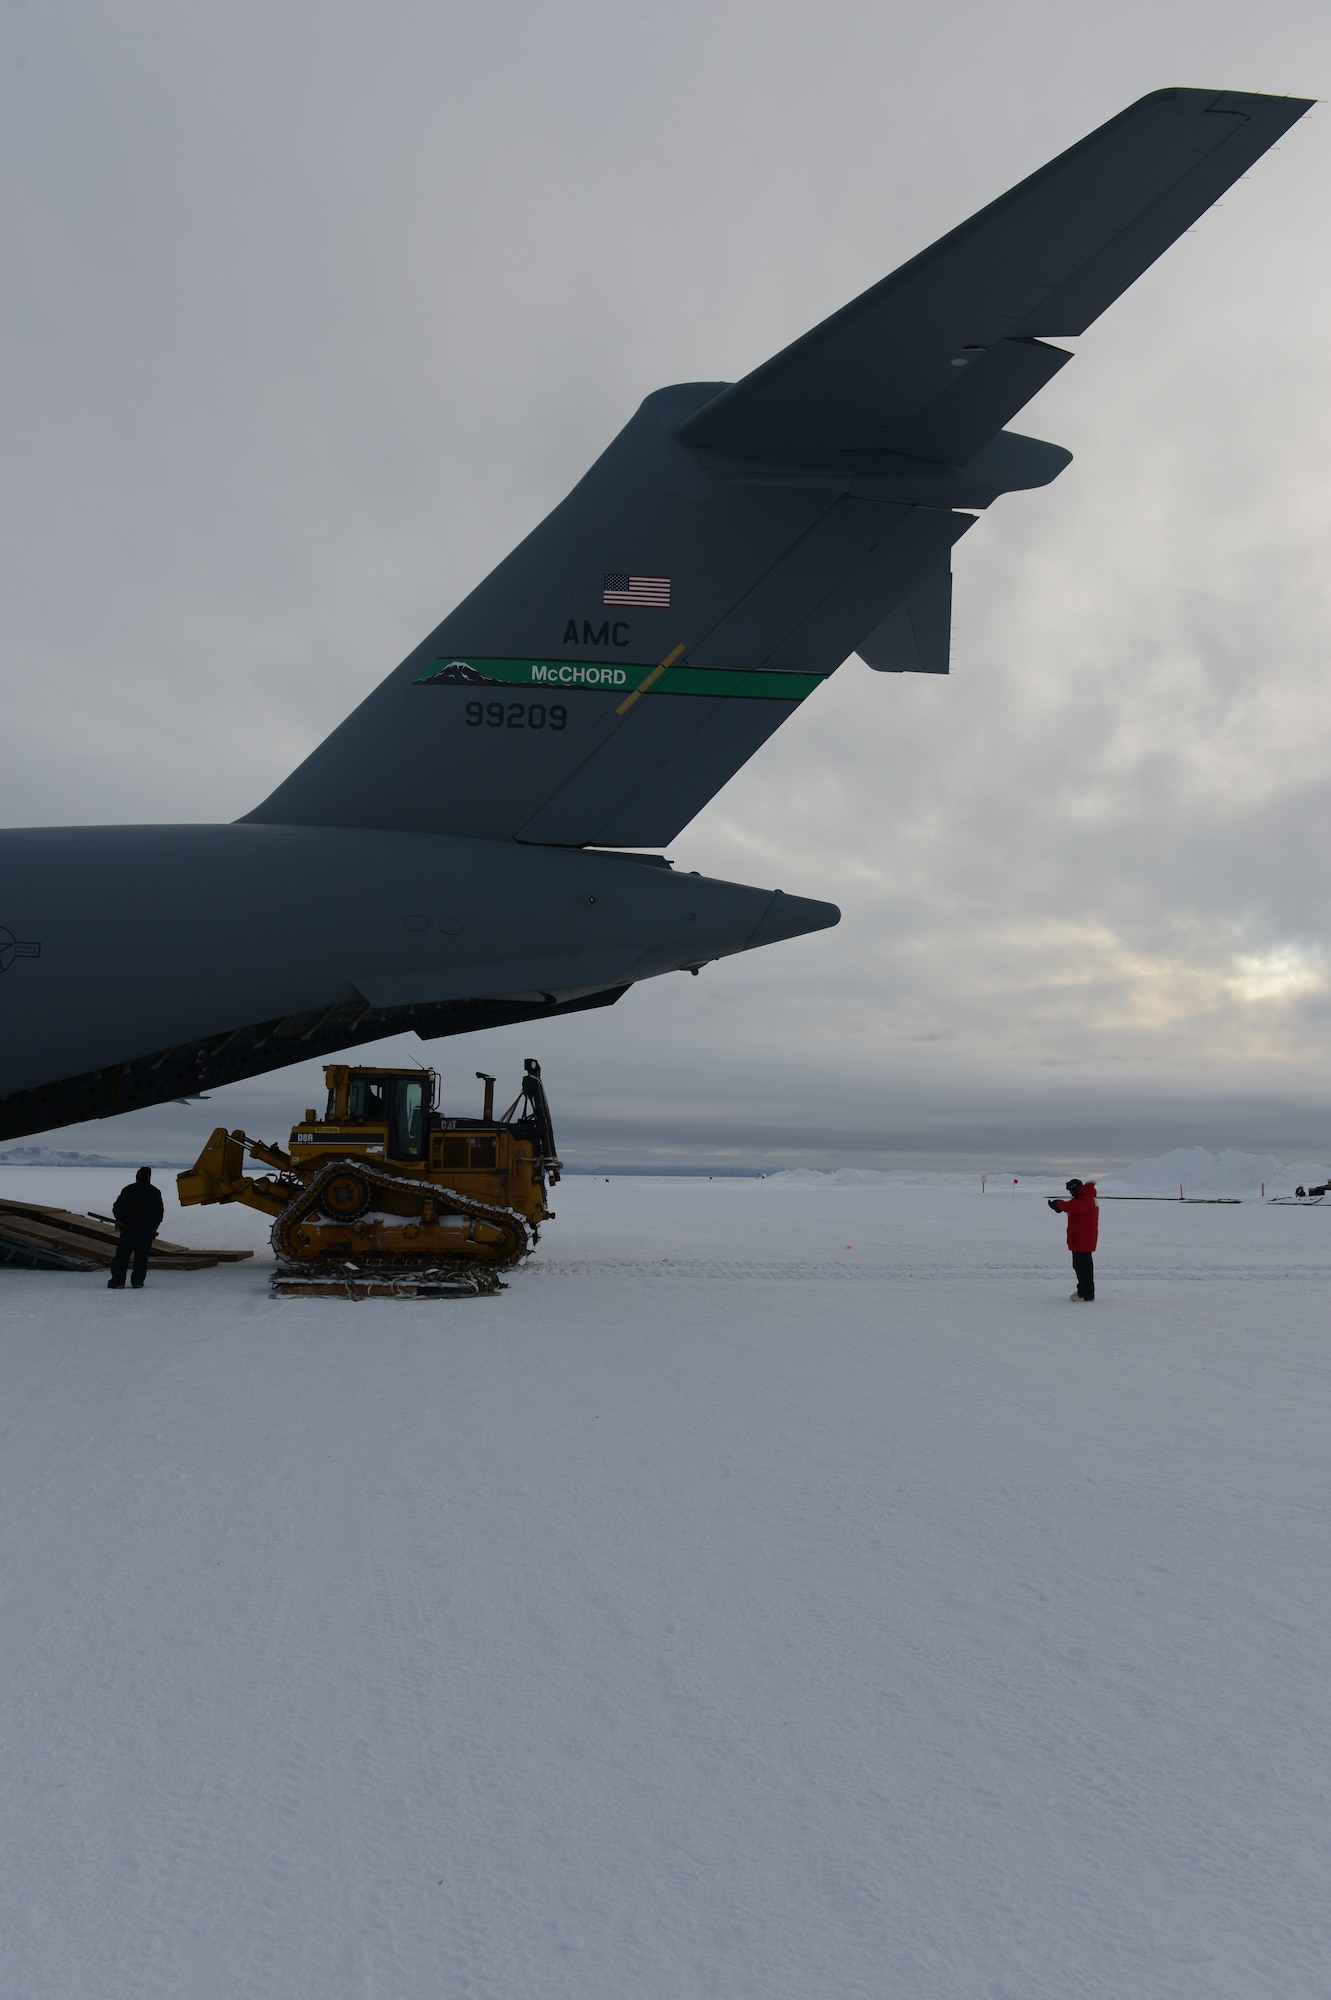 A Caterpillar D-8 bulldozer starts its upload to the back of the McChord Field C-17 Globemaster III aircraft, Oct. 8th, 2014 at the Pegasus White Ice runway, part of McMurdo Station, Antarctica. The bulldozer weighed in at approximately 75,000 pounds and put the maximum cargo weight of the C-17 to its limits. (U.S. Air Force photo/Master Sgt. Todd Wivell)